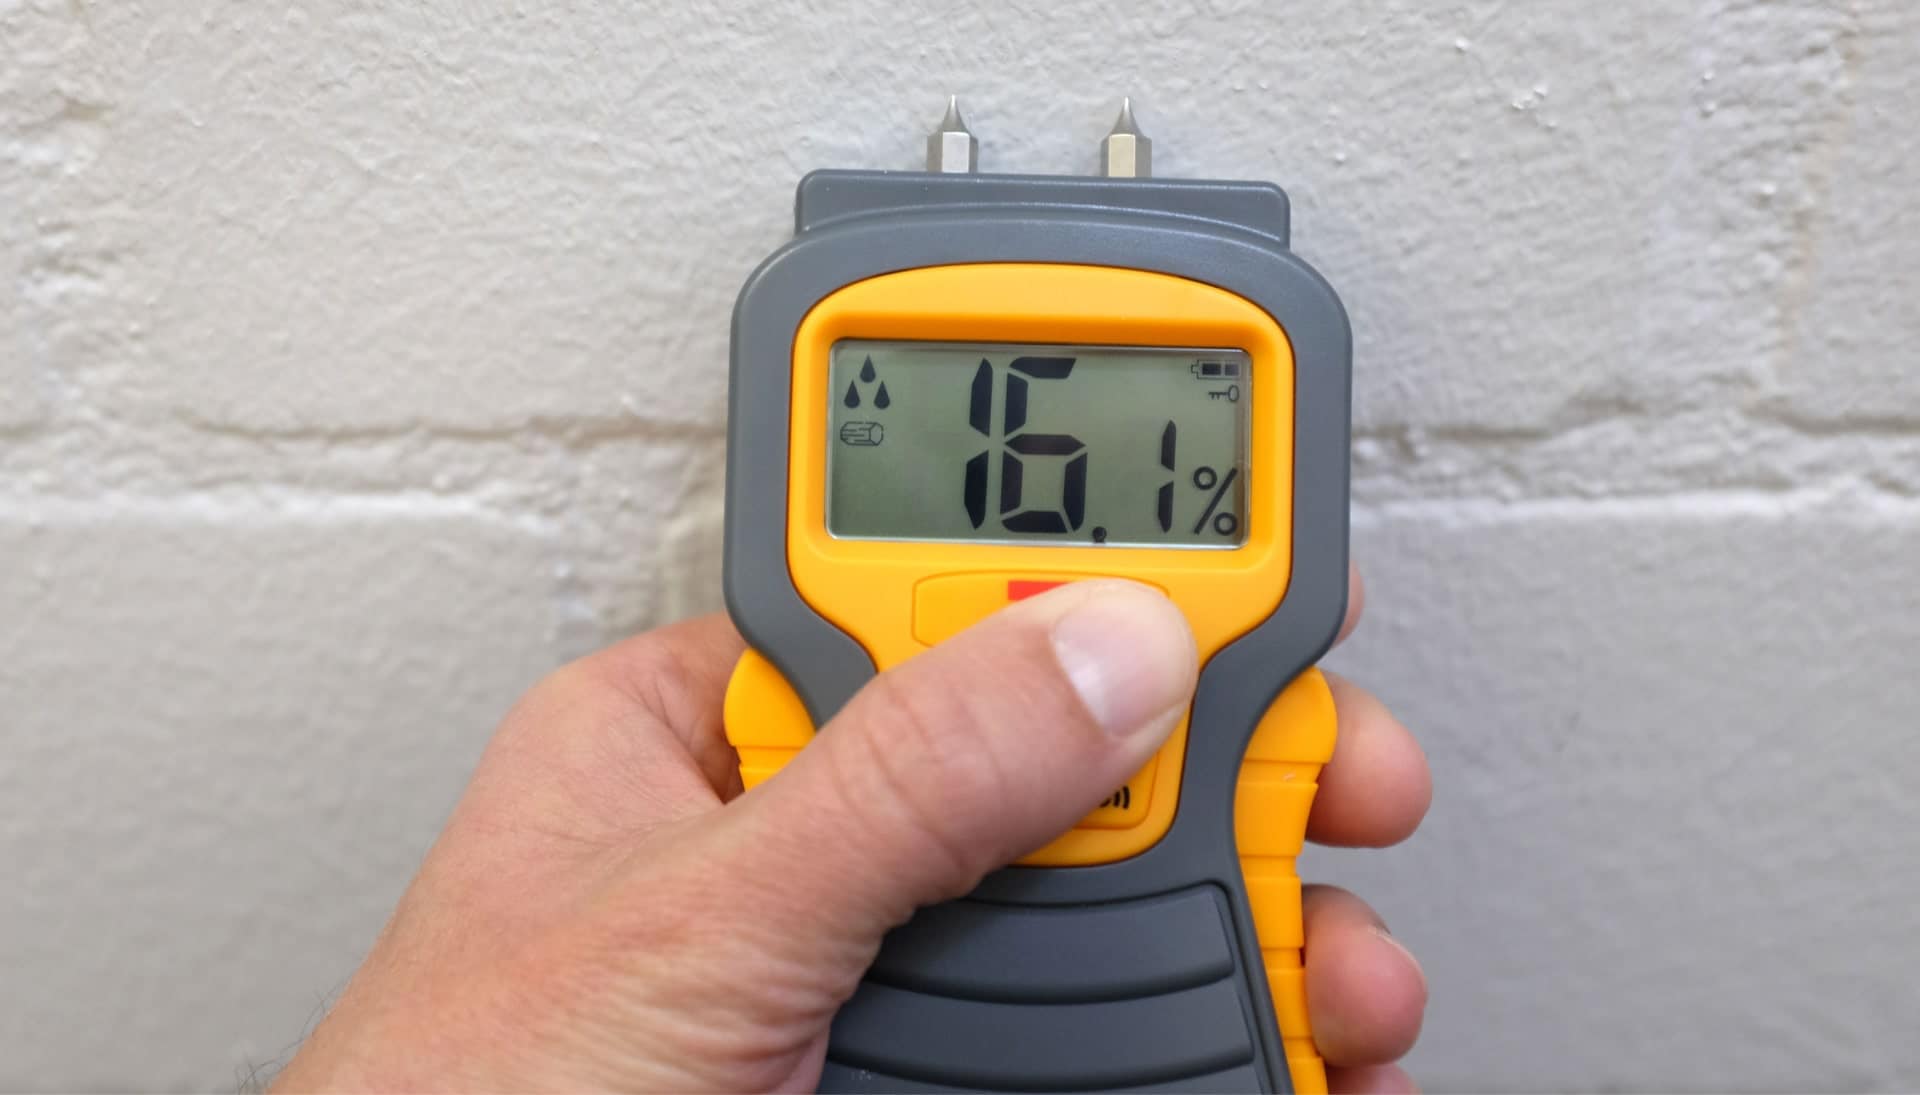 We provide fast, accurate, and affordable mold testing services in Orem, Utah.